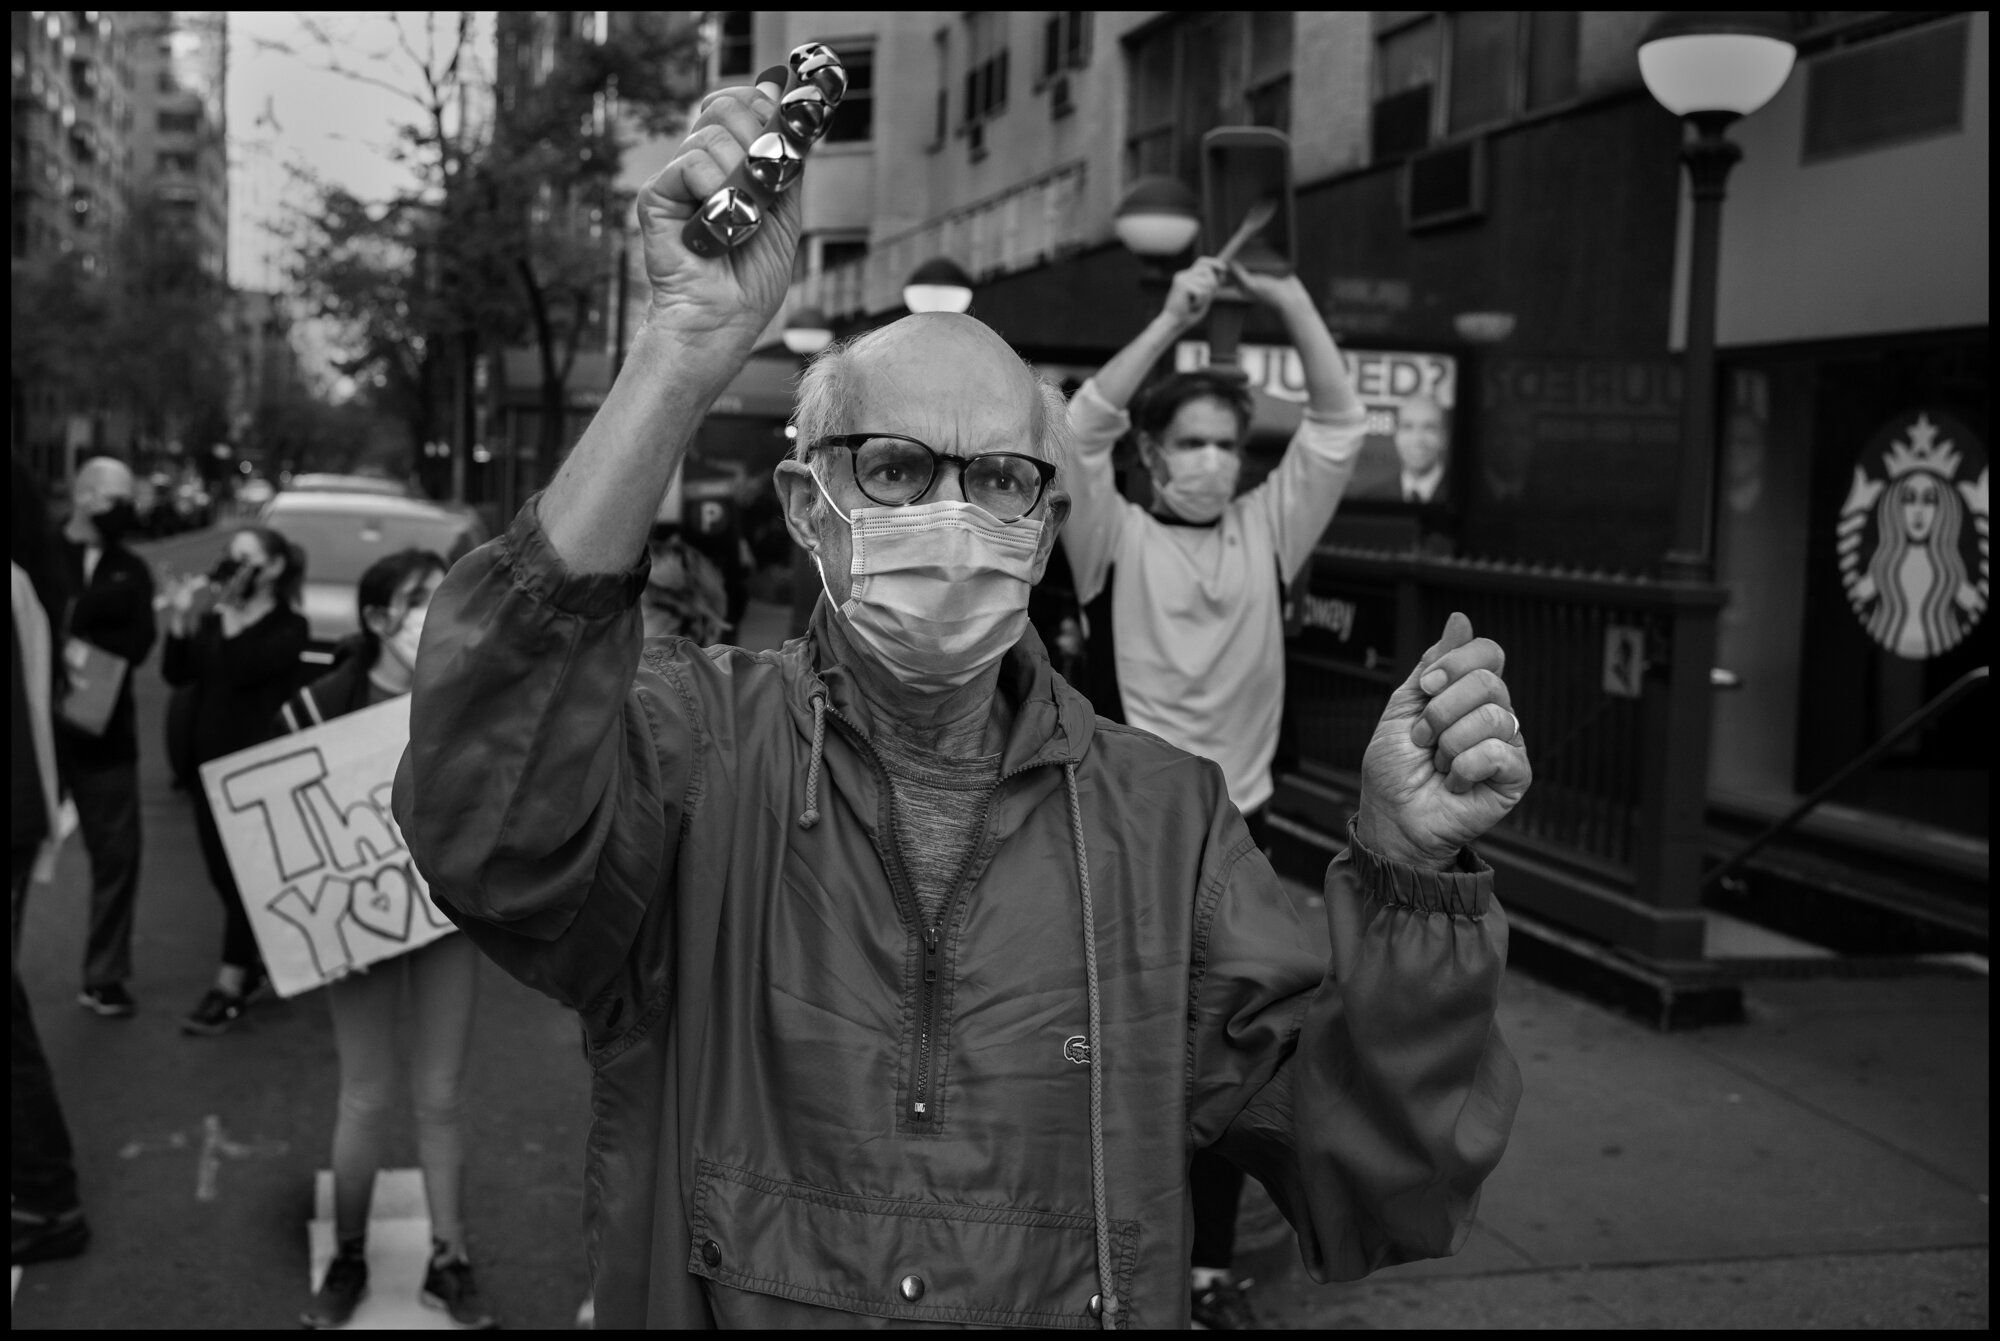  Darrell, a resident of New York’s Upper East Side, thanks the healthcare workers of Lenox Hill Hospital at 7pm.   May 2, 2020. © Peter Turnley.   ID# 36-004 